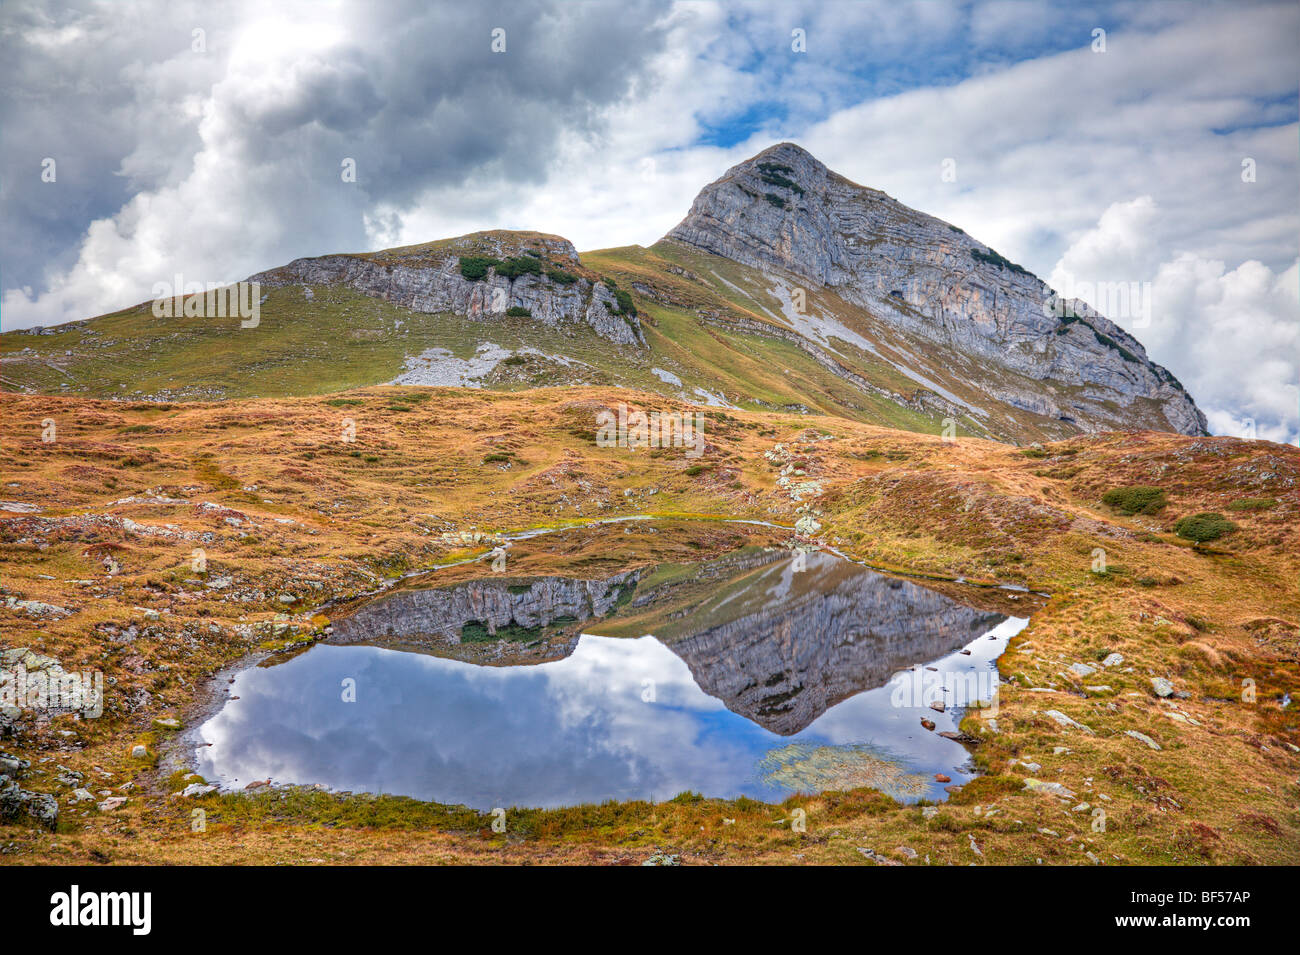 Mt. Margelkopf with a mountain lake in September, Buchs, Swiss Eastern Alps, Switzerland, Europe Stock Photo